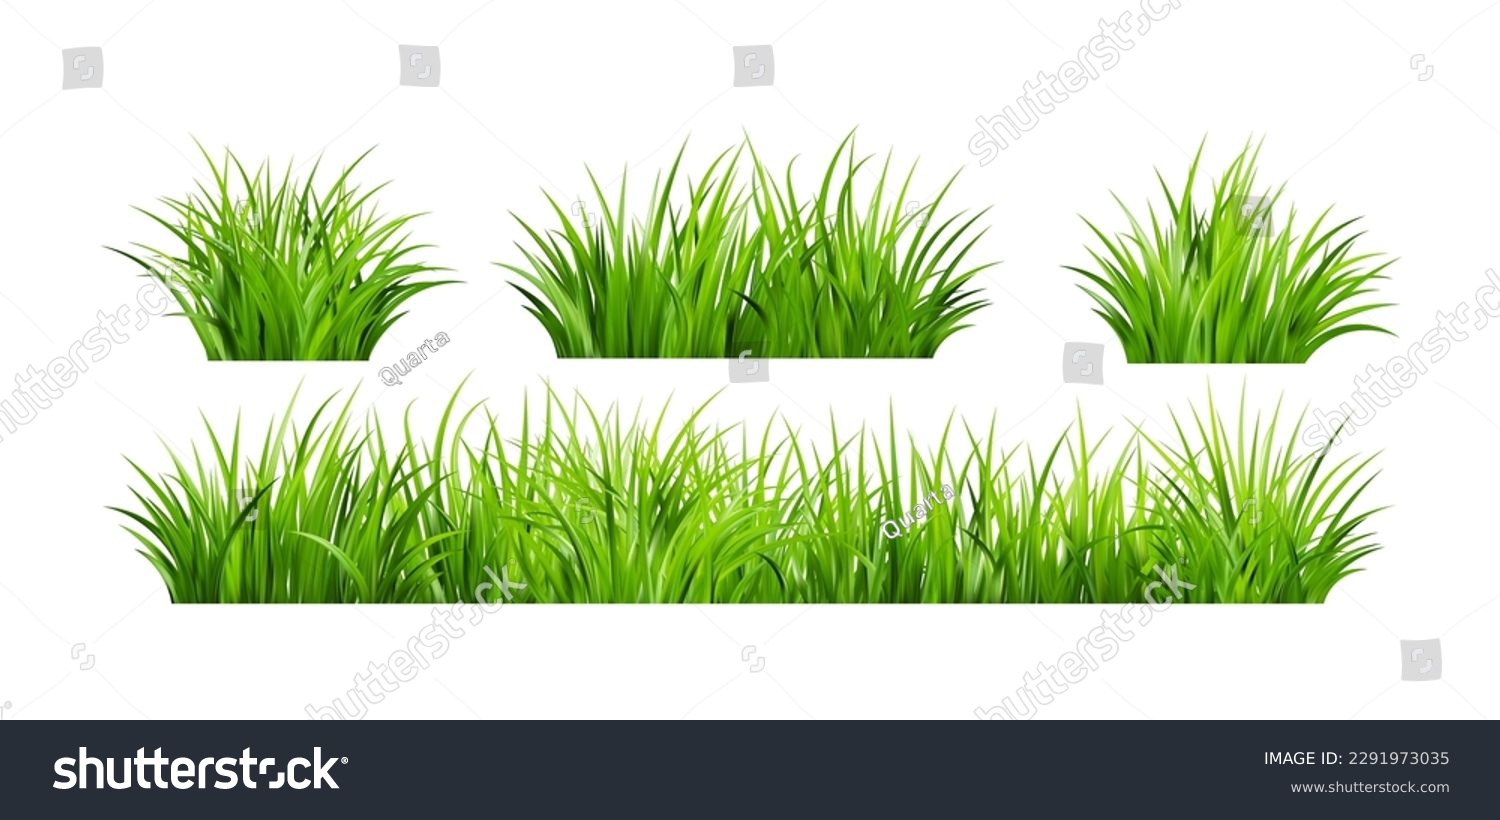 Realistic green grass. Bushes of fresh greens. Spring meadow. Summer lawn. Glade with plants. Nature landscape vector illustration. #2291973035